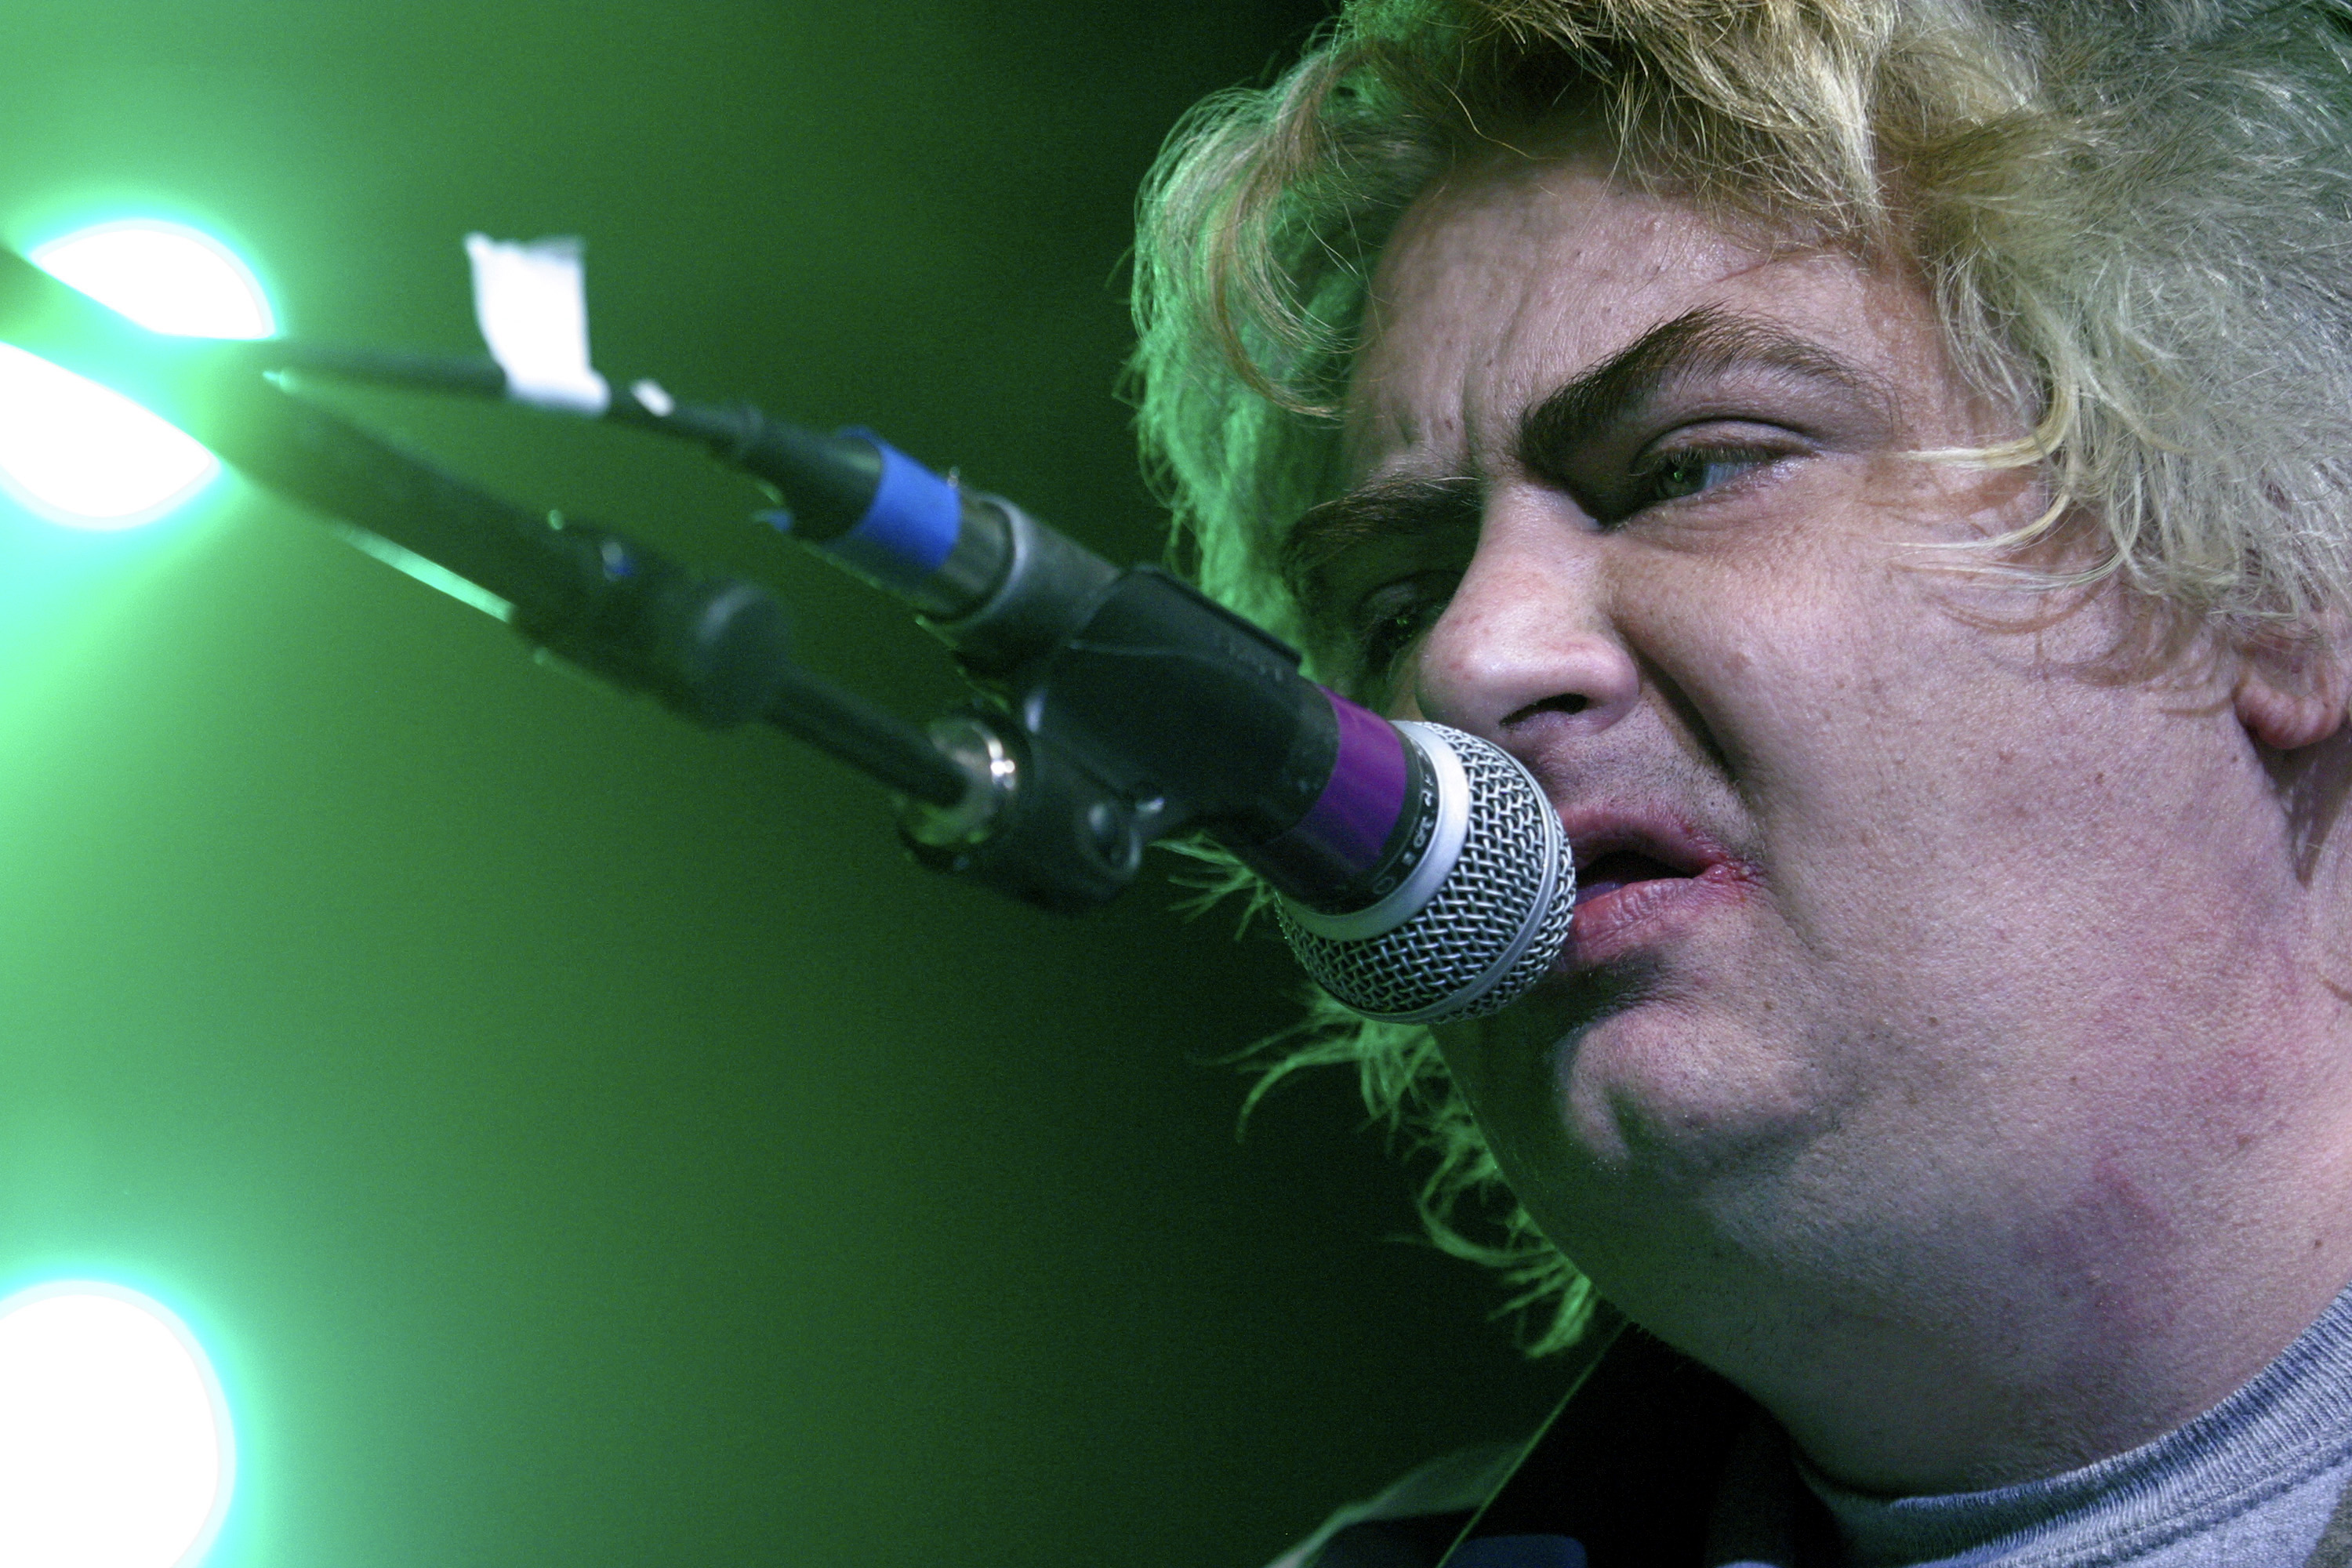 Beck, Jeff Tweedy and More Cover Daniel Johnston For <i>Honey I Sure Miss You</i> Tribute